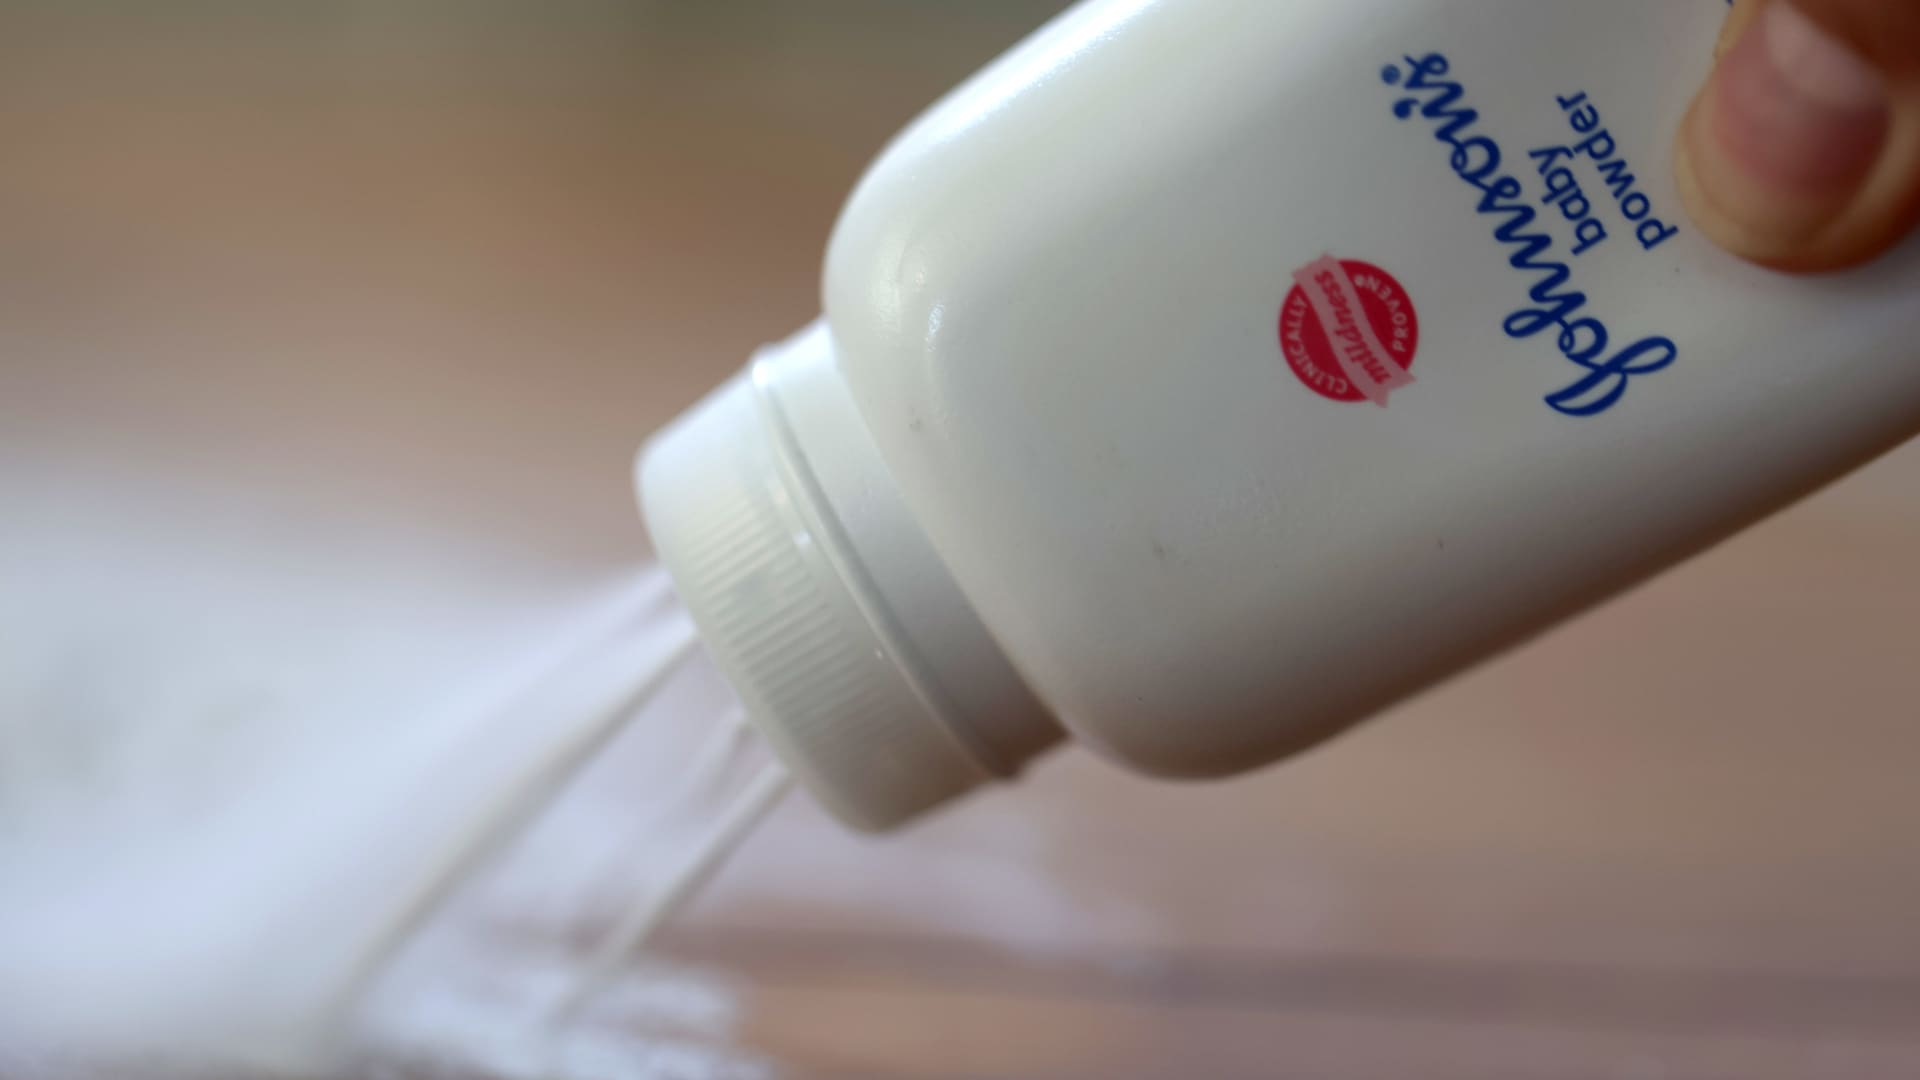 Johnson & Johnson will pay .5 billion to resolve nearly all talc ovarian cancer lawsuits in U.S.